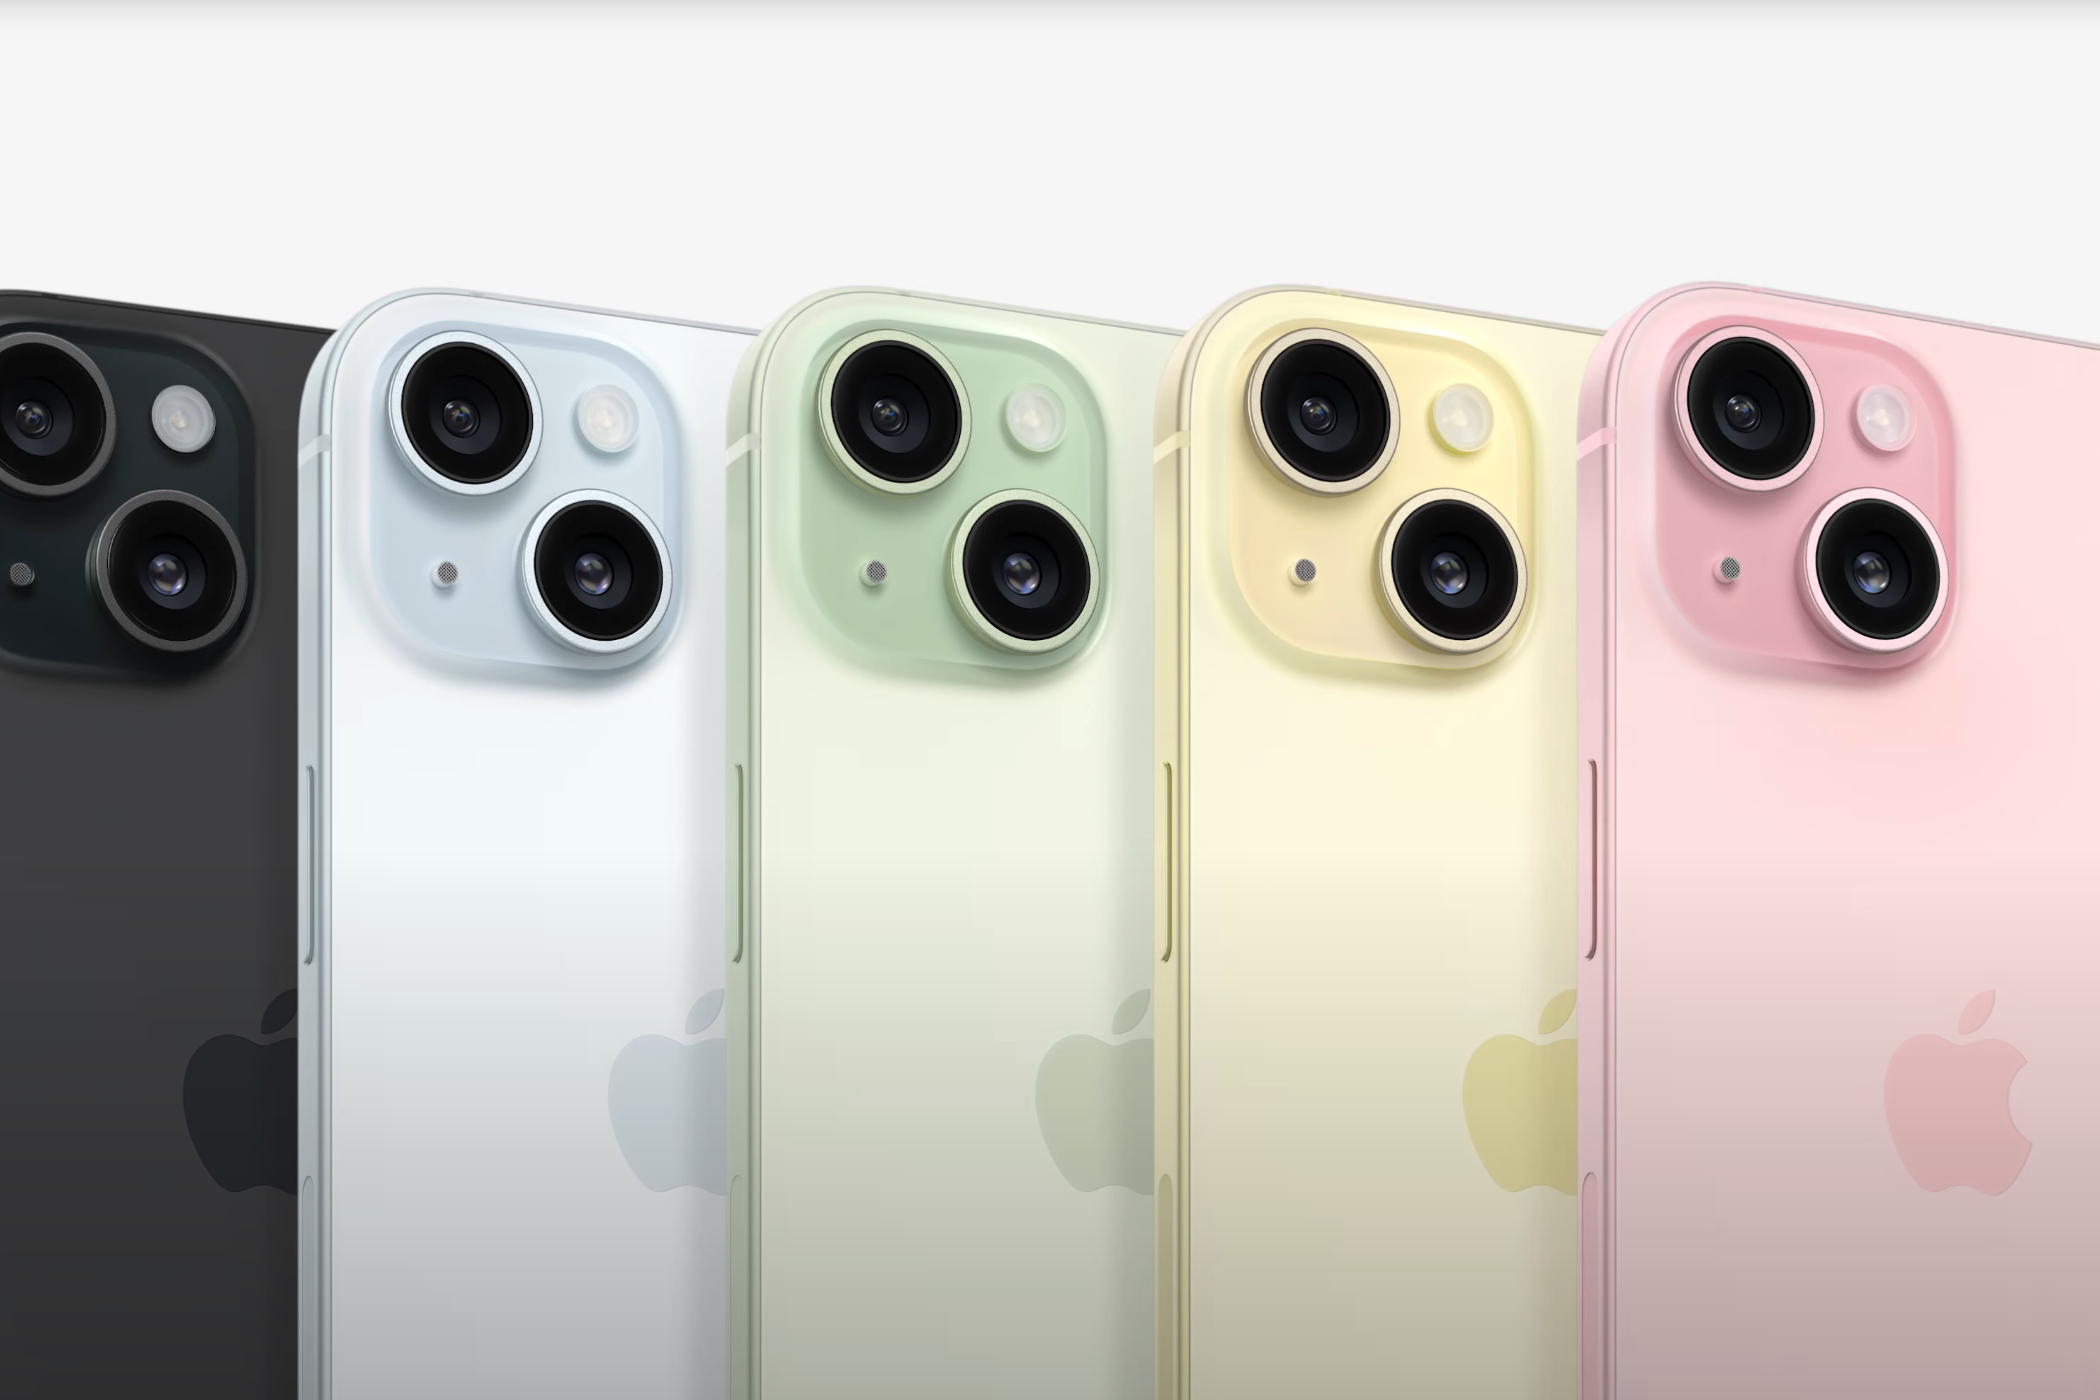 iPhone 15 mainline phones in black, blue, green, yellow, and pink all lined up next to each other.